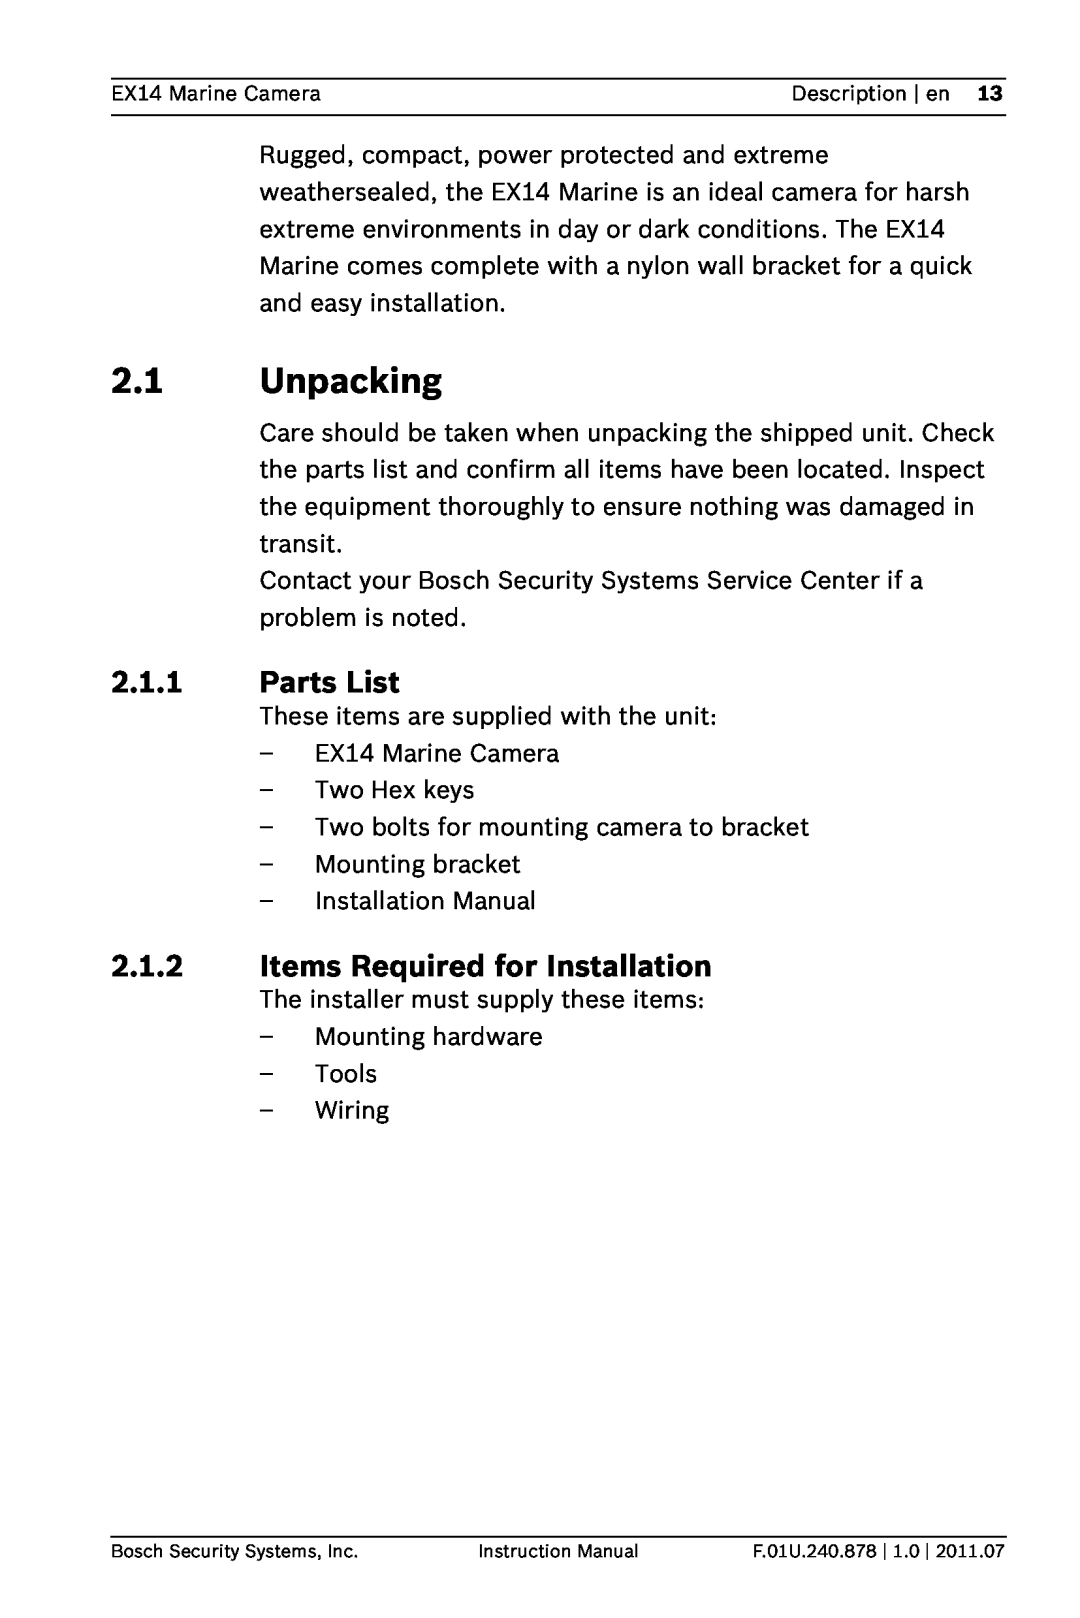 Bosch Appliances EX14 instruction manual Unpacking, Parts List, Items Required for Installation 